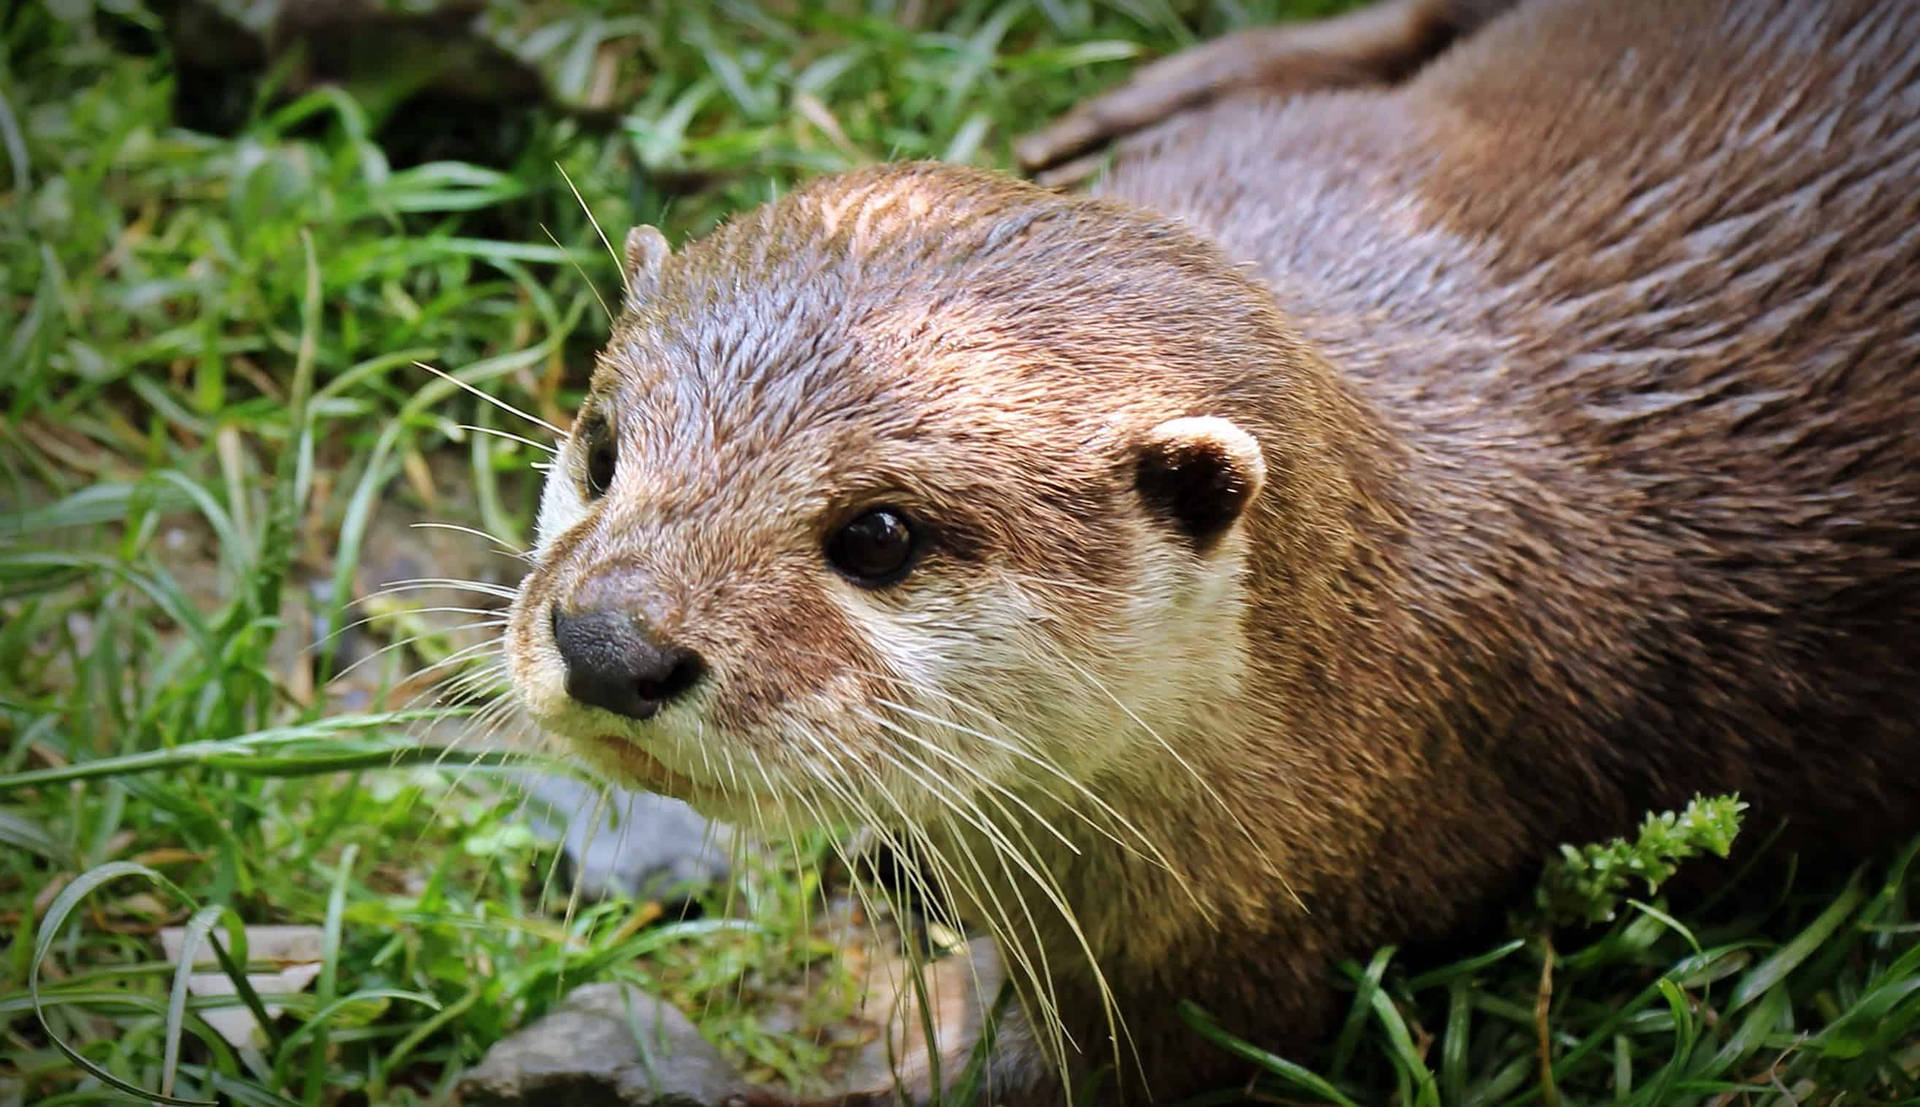 A Mature River Otter Posing Graciously On Land